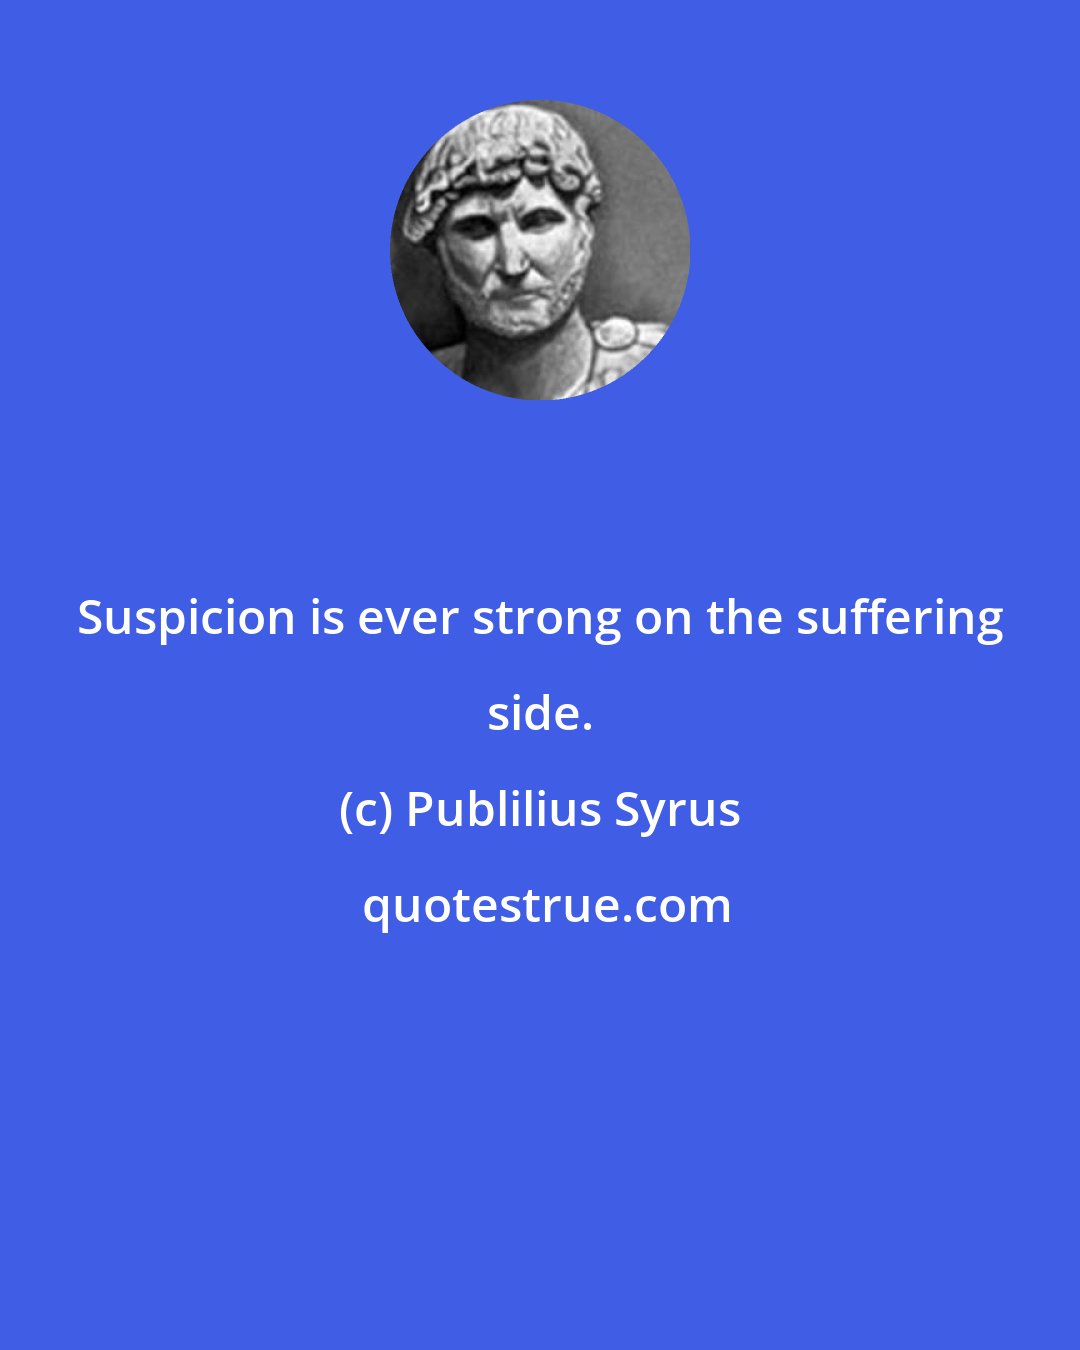 Publilius Syrus: Suspicion is ever strong on the suffering side.